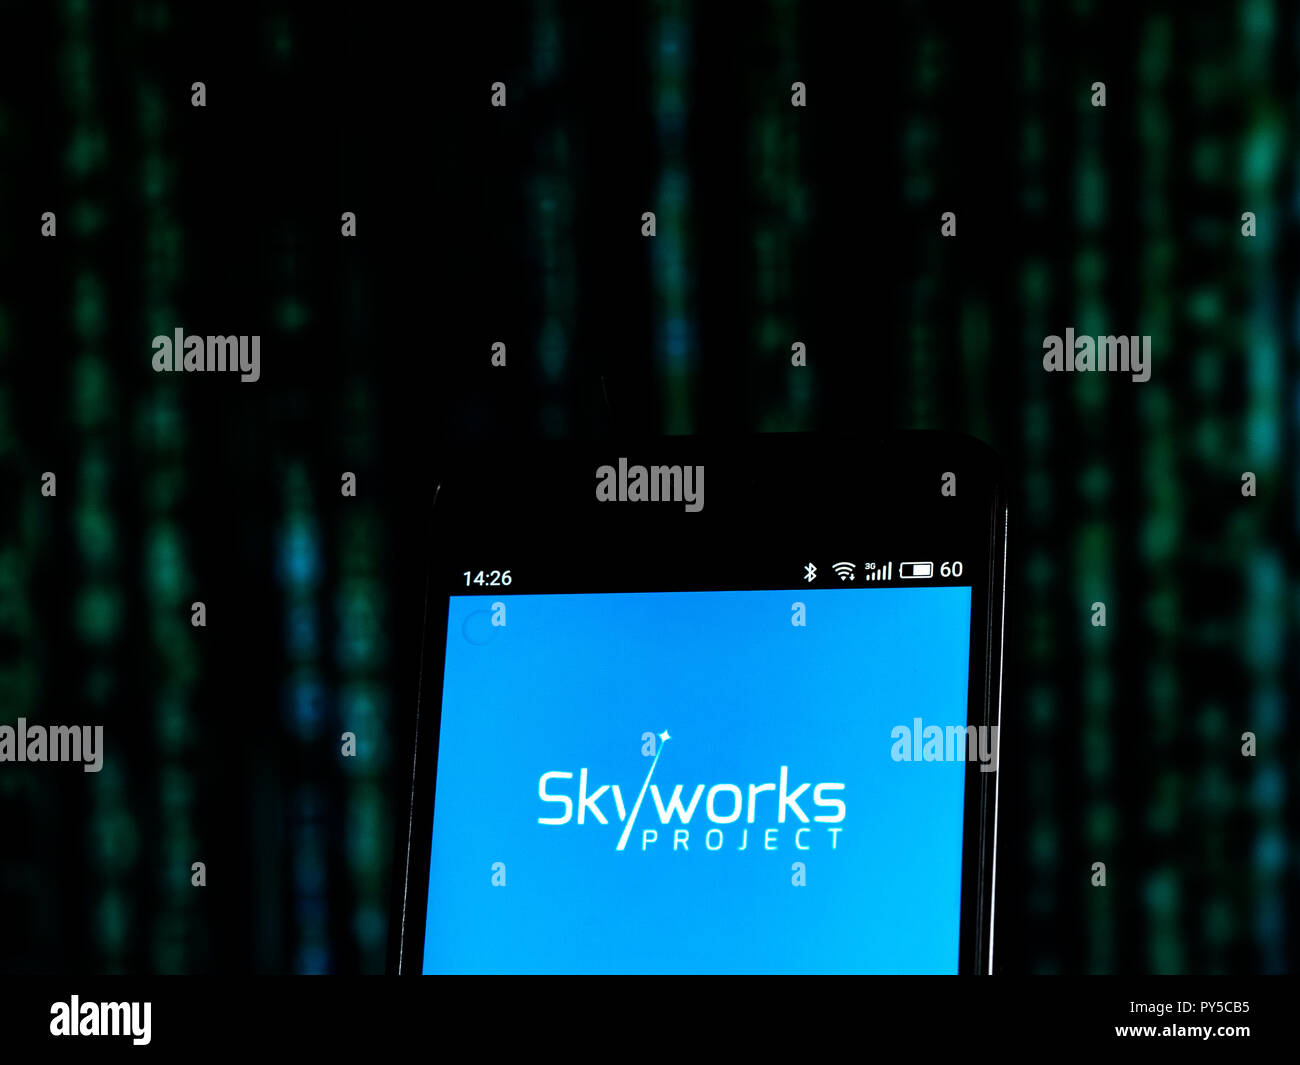 Skyworks Solutions Semiconductor manufacturing company logo seen displayed on smart phone. Skyworks manufactures semiconductors for use in radio frequency and mobile communications systems. Stock Photo